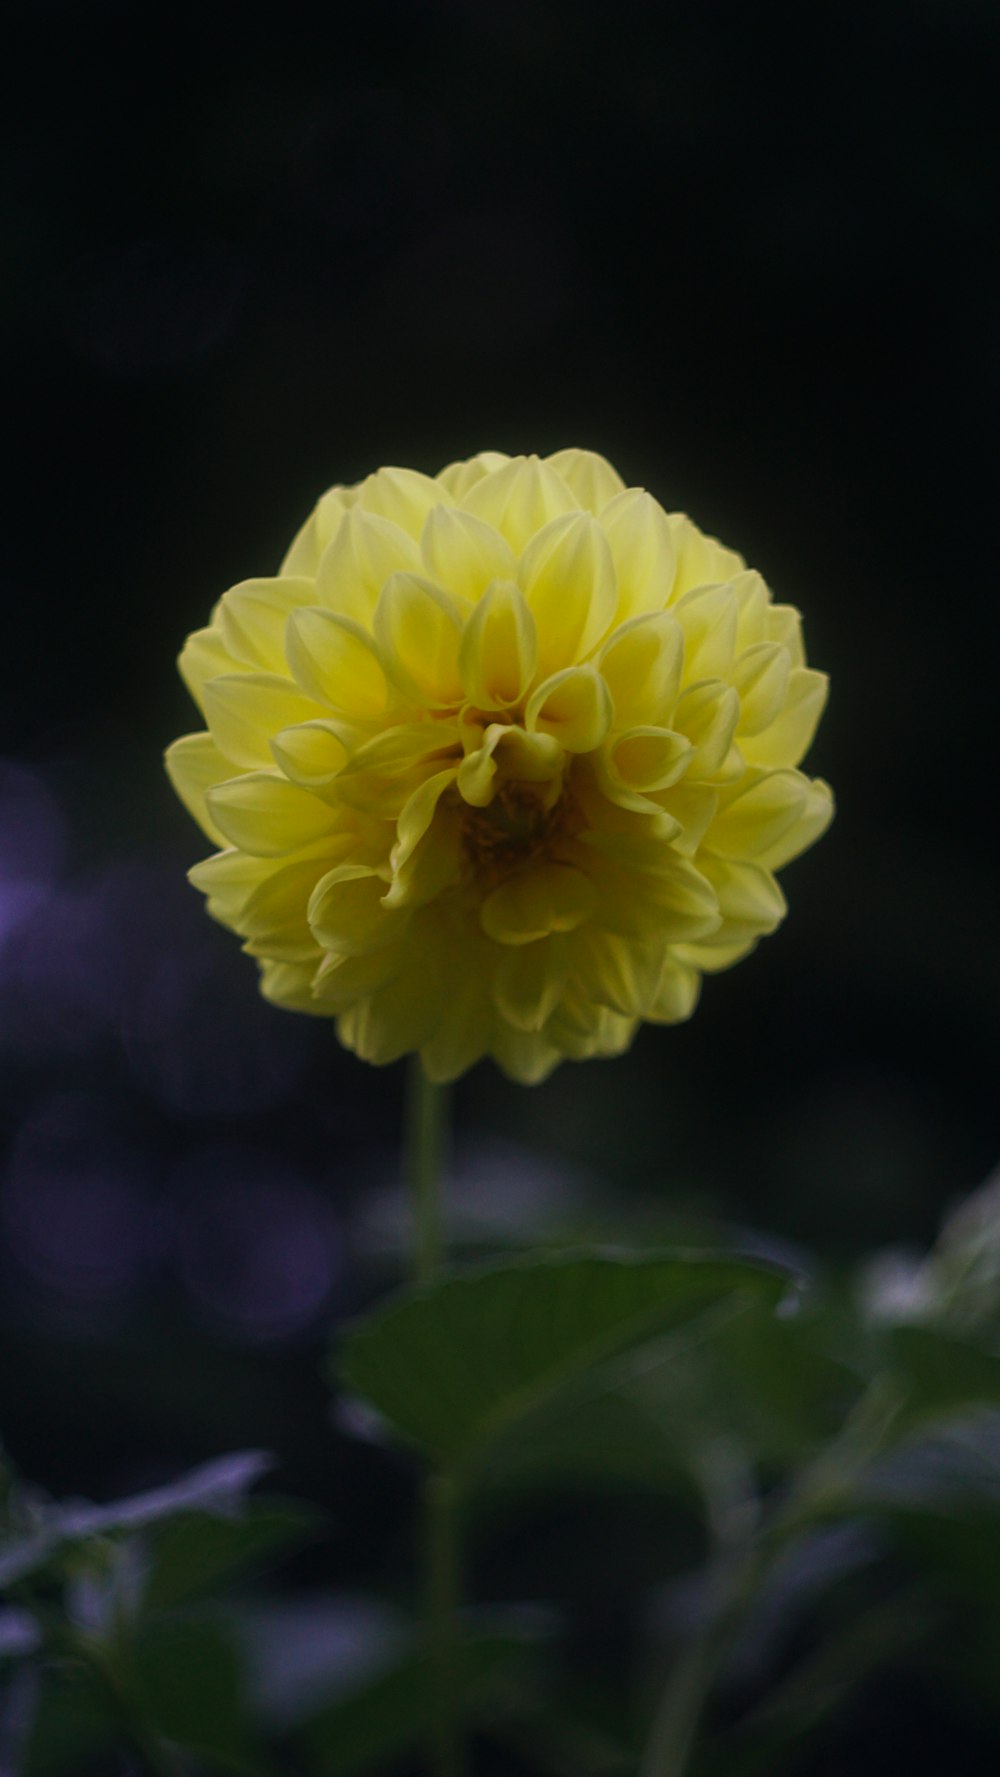 a yellow flower with green leaves in the foreground